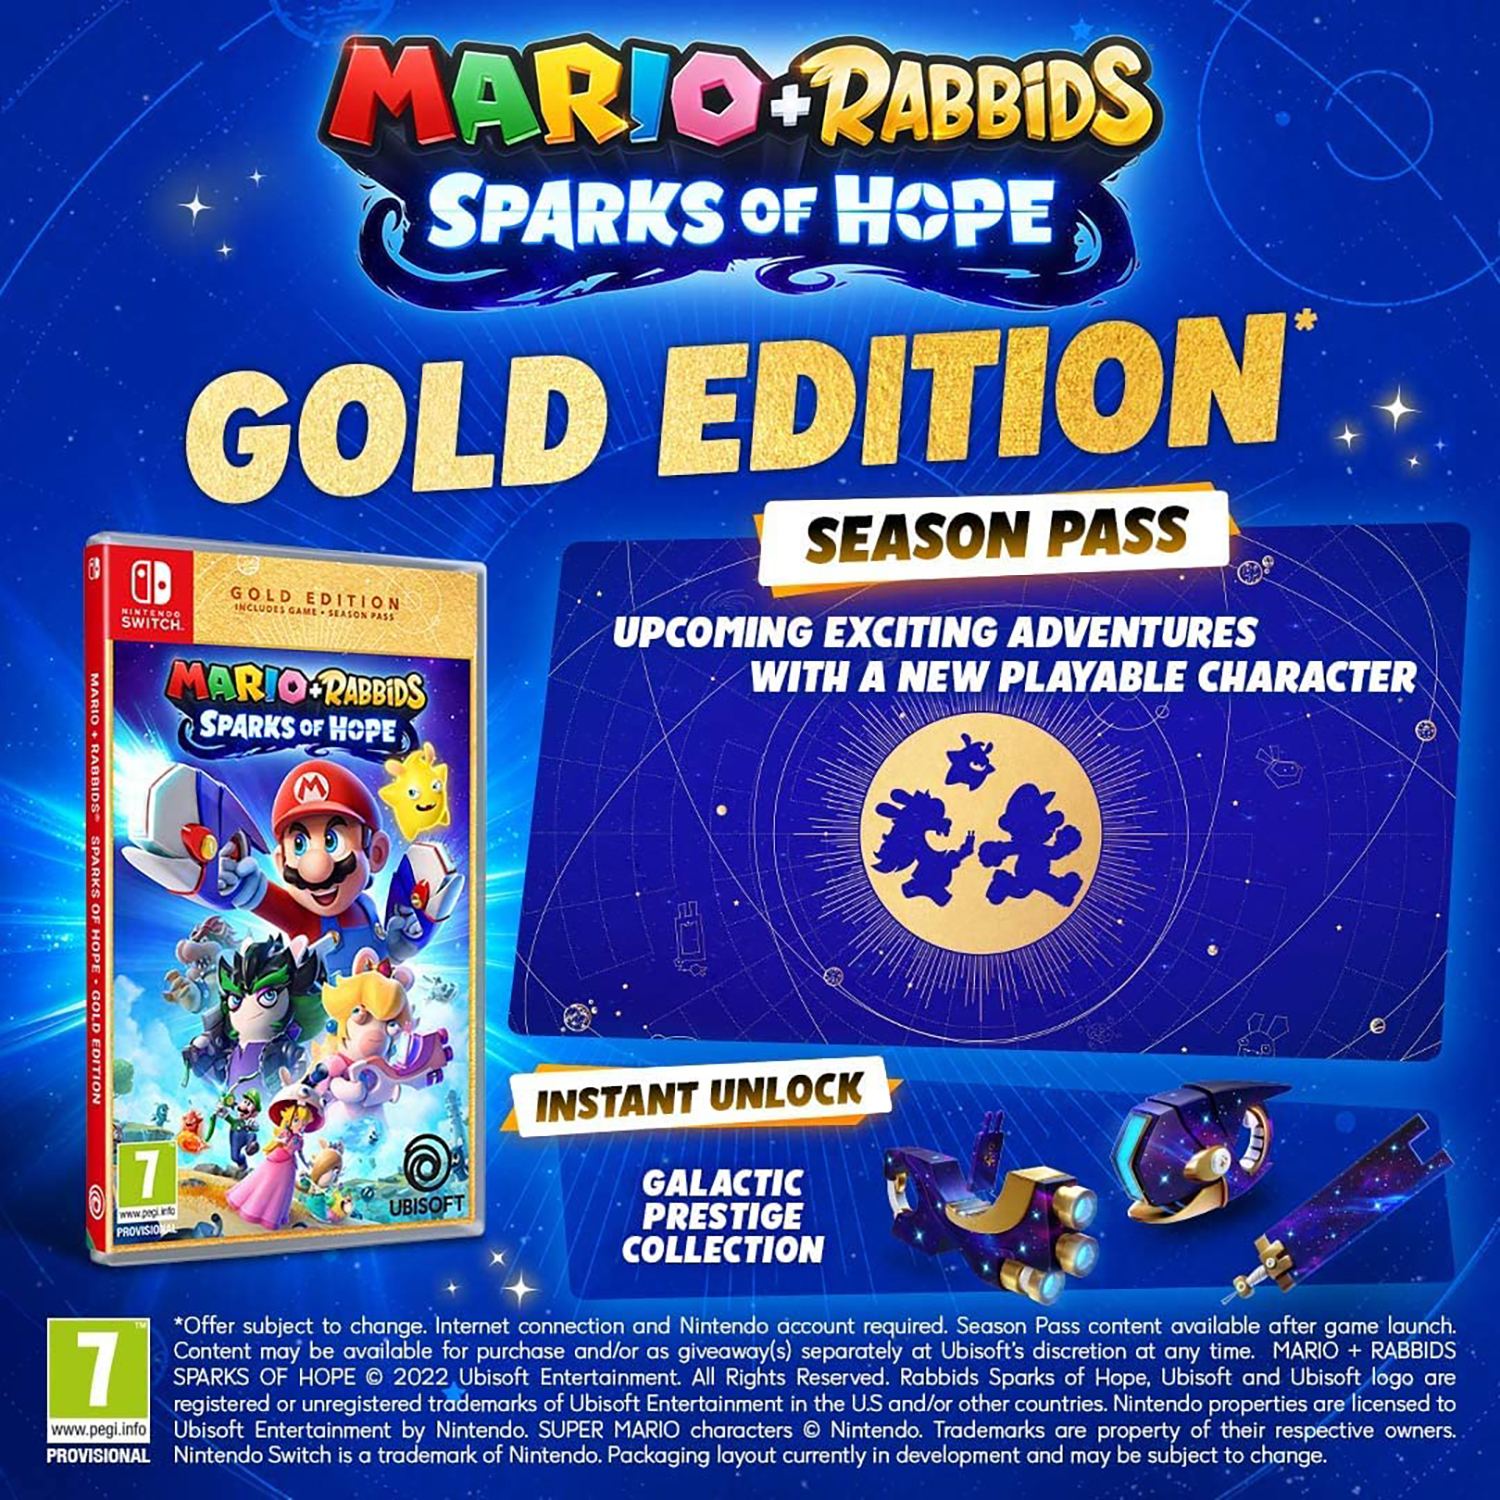 Mario + Rabbids Sparks of Hope [Gold Edition] for Nintendo Switch